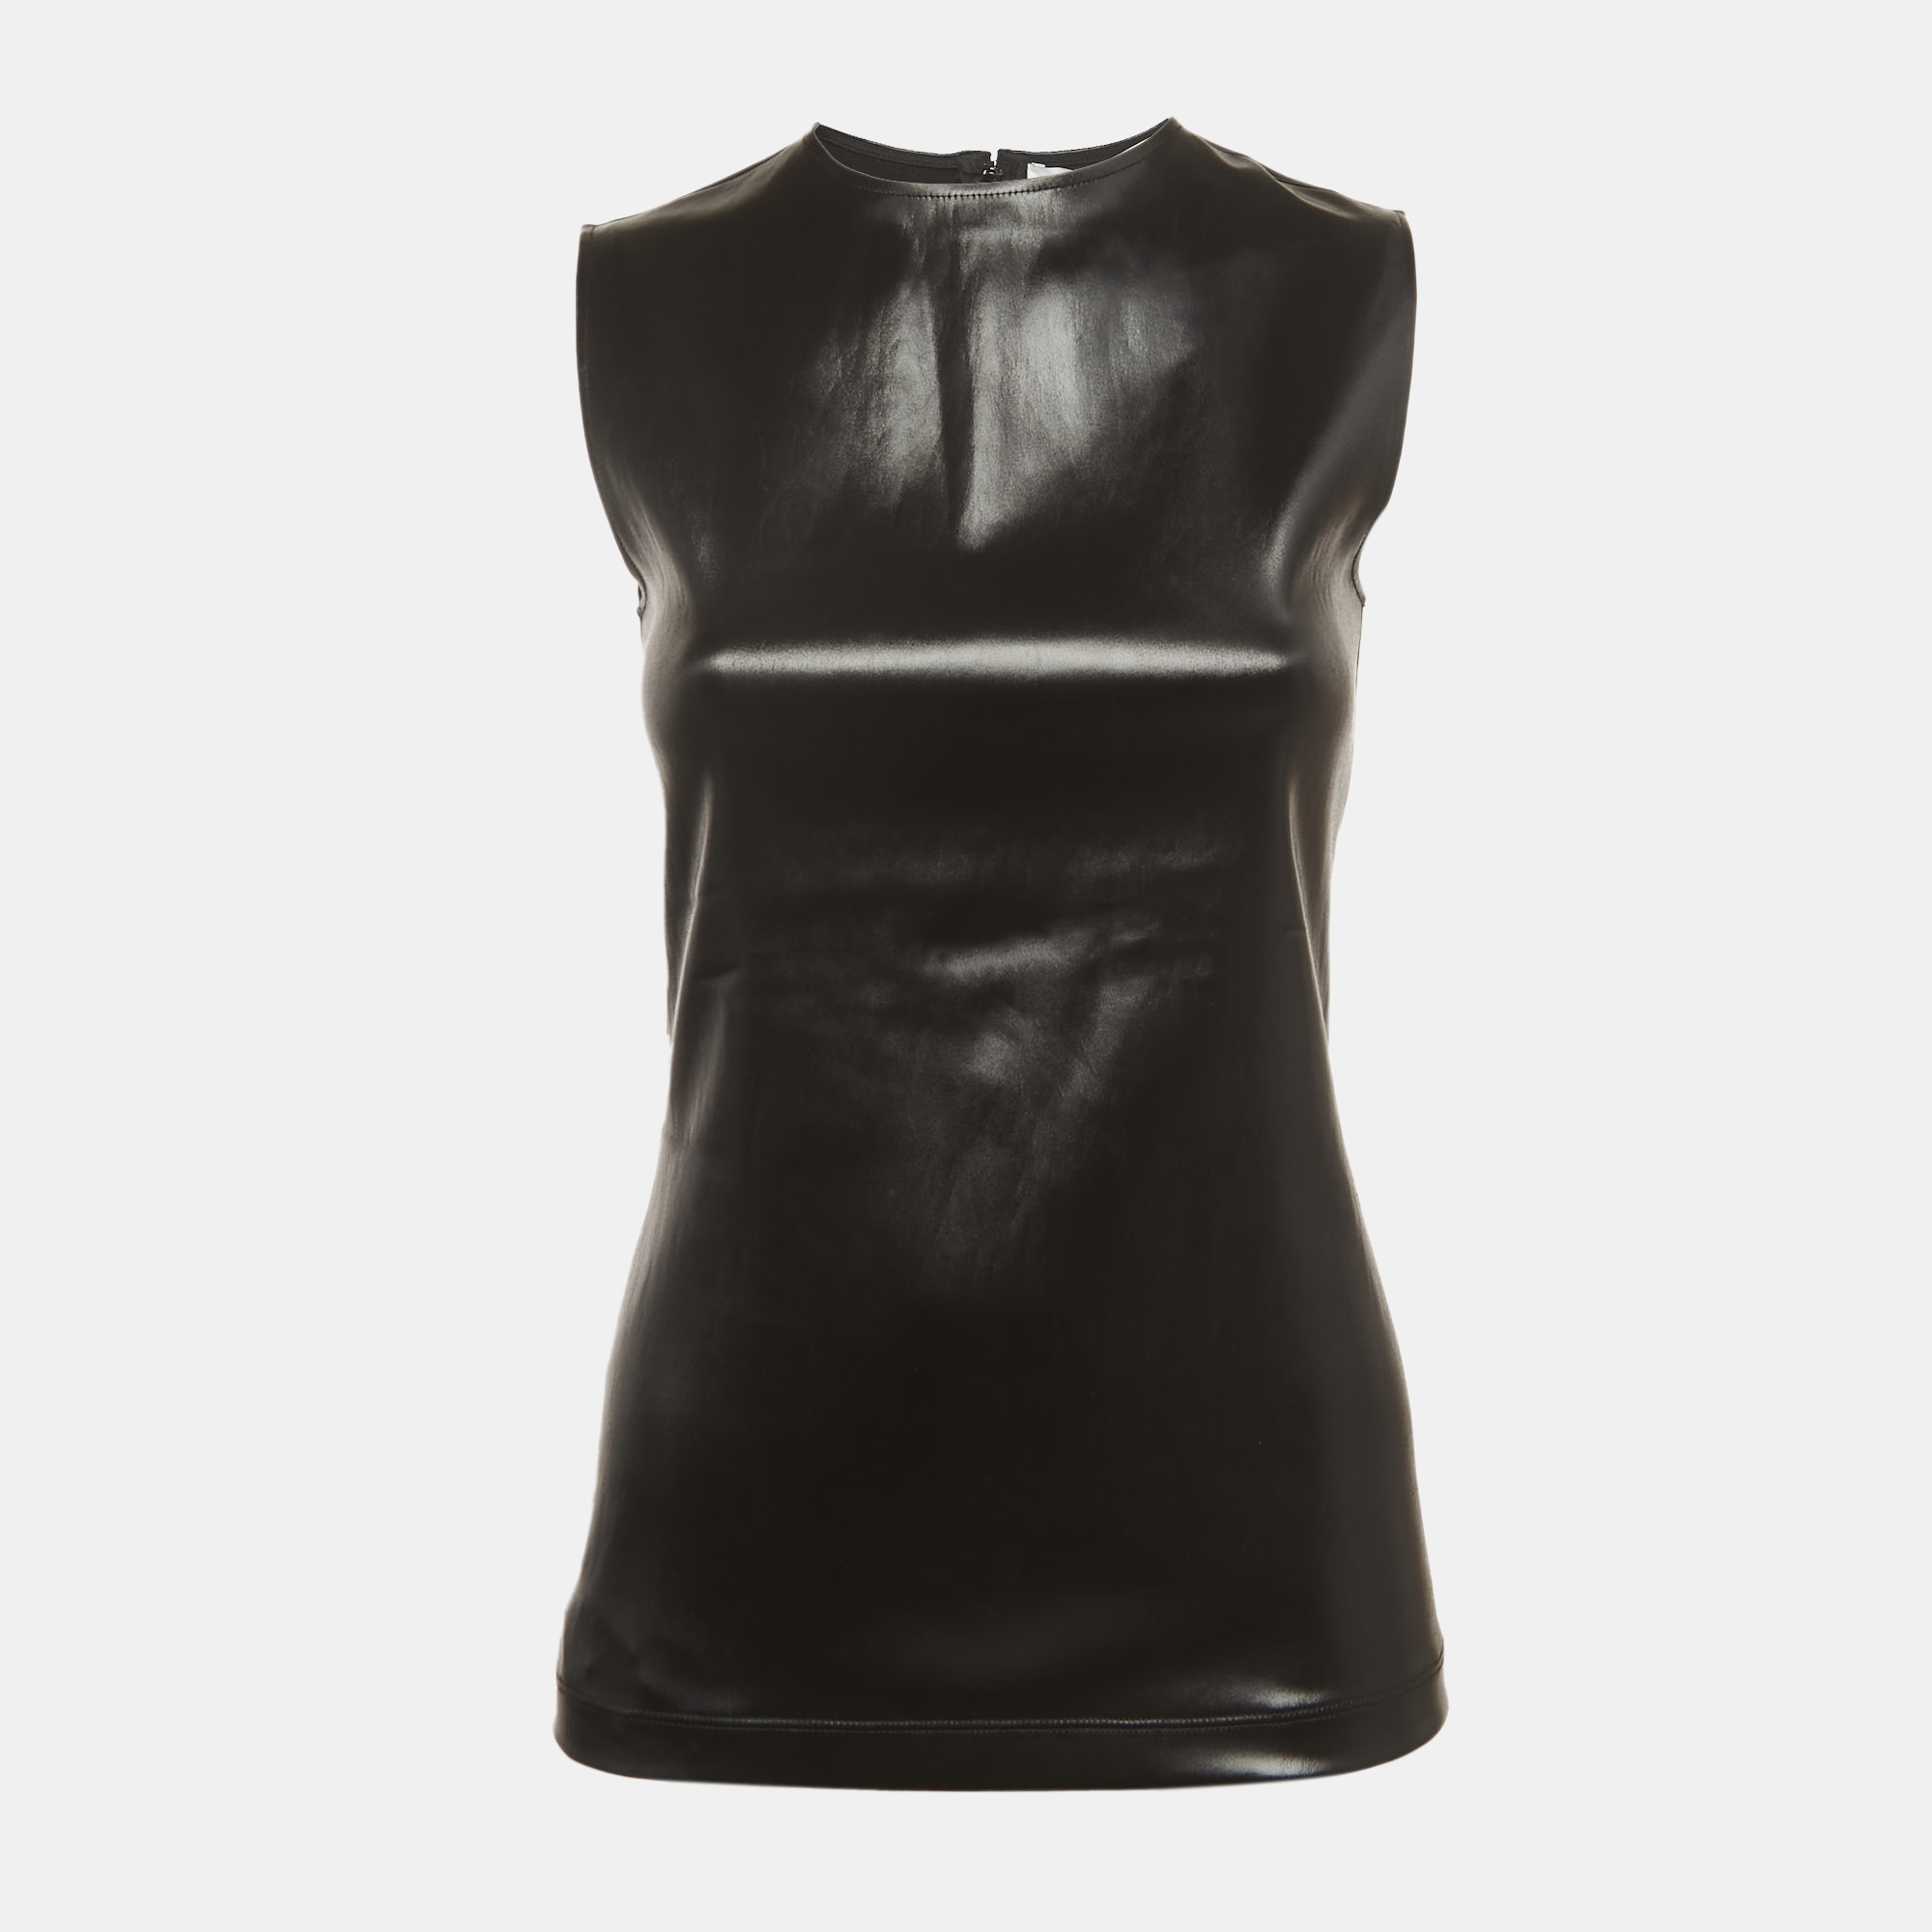 Givenchy Black Faux Leather Sleeveless Top S